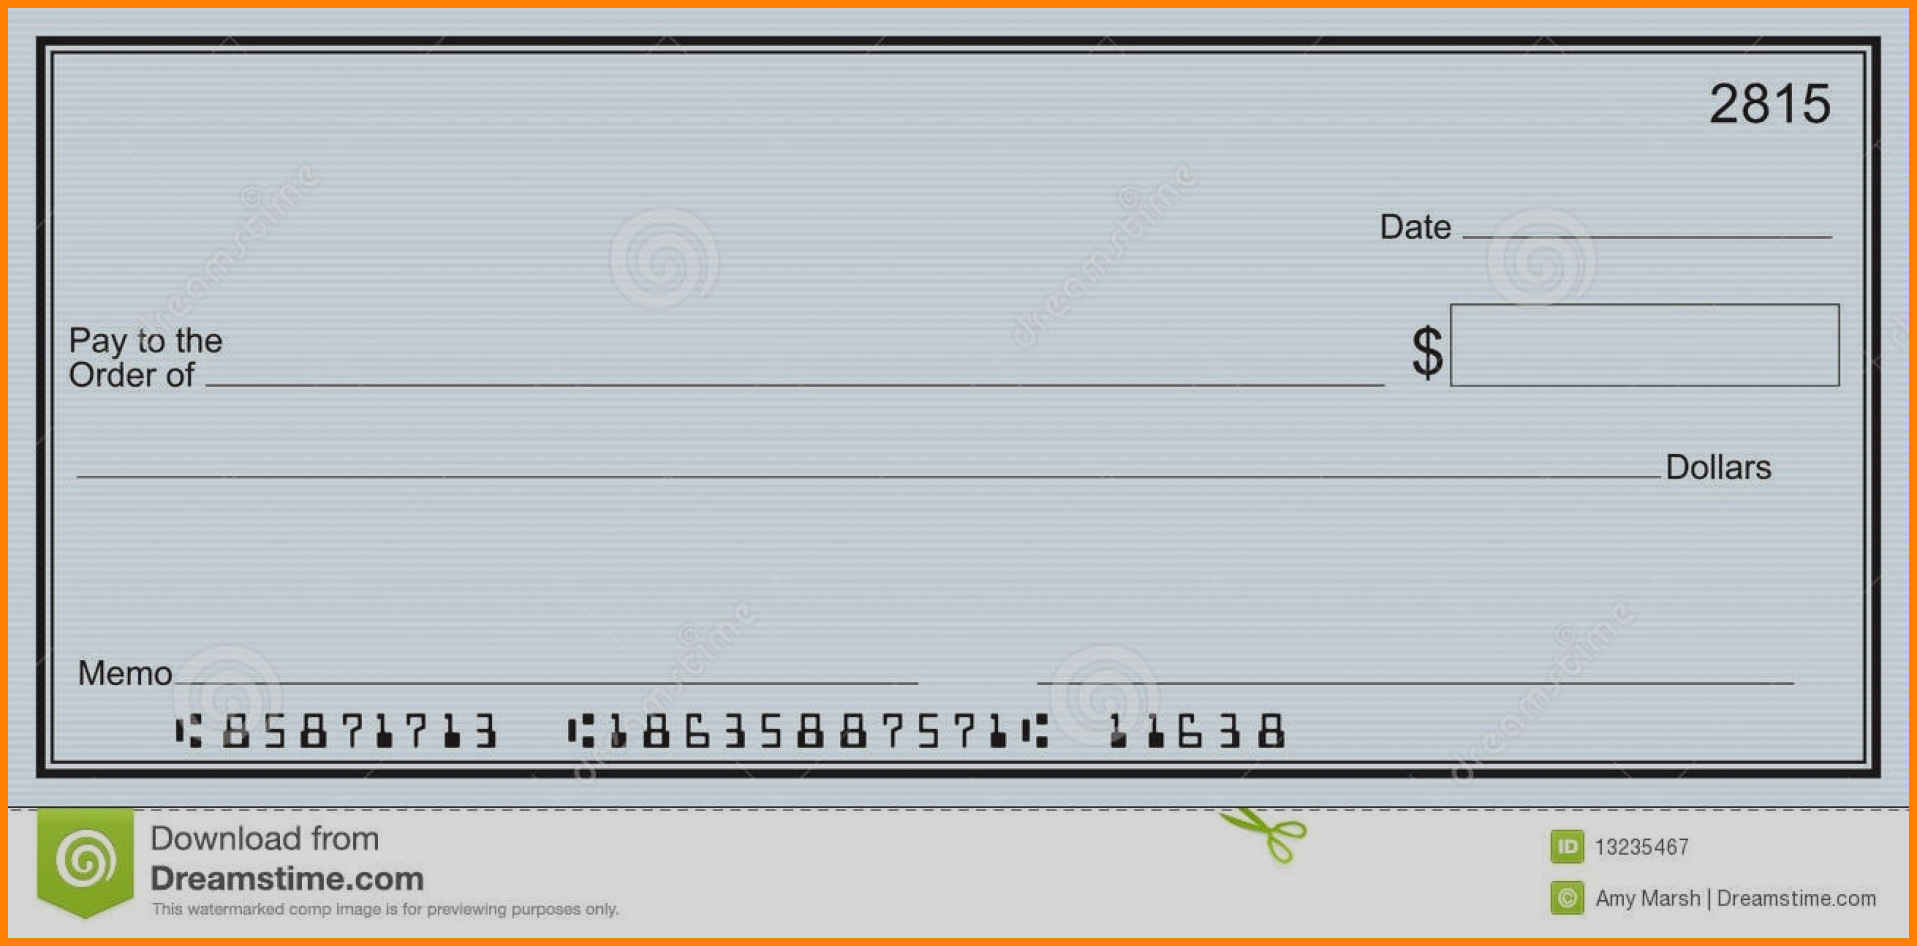 Fillable Blank Check Template - Free Download For Editable Blank Check Template